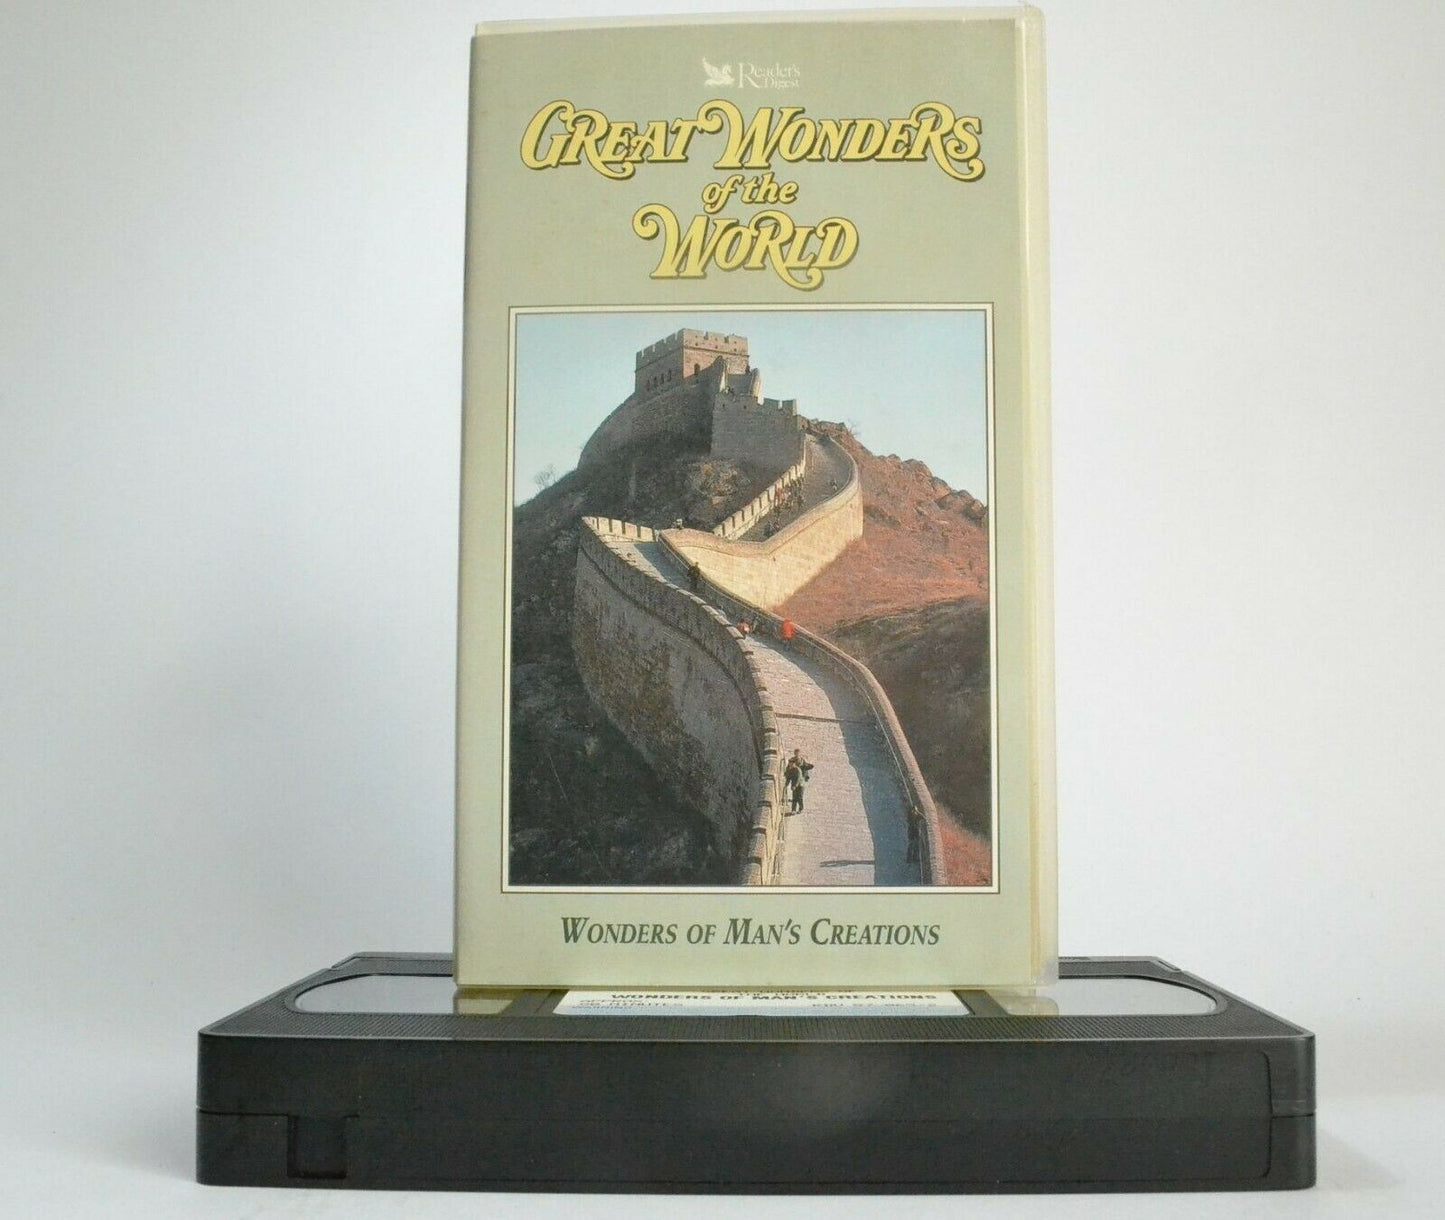 Great Wonders Of The World: Wonders Of Man's Creations [Colosseum] - Pal VHS-